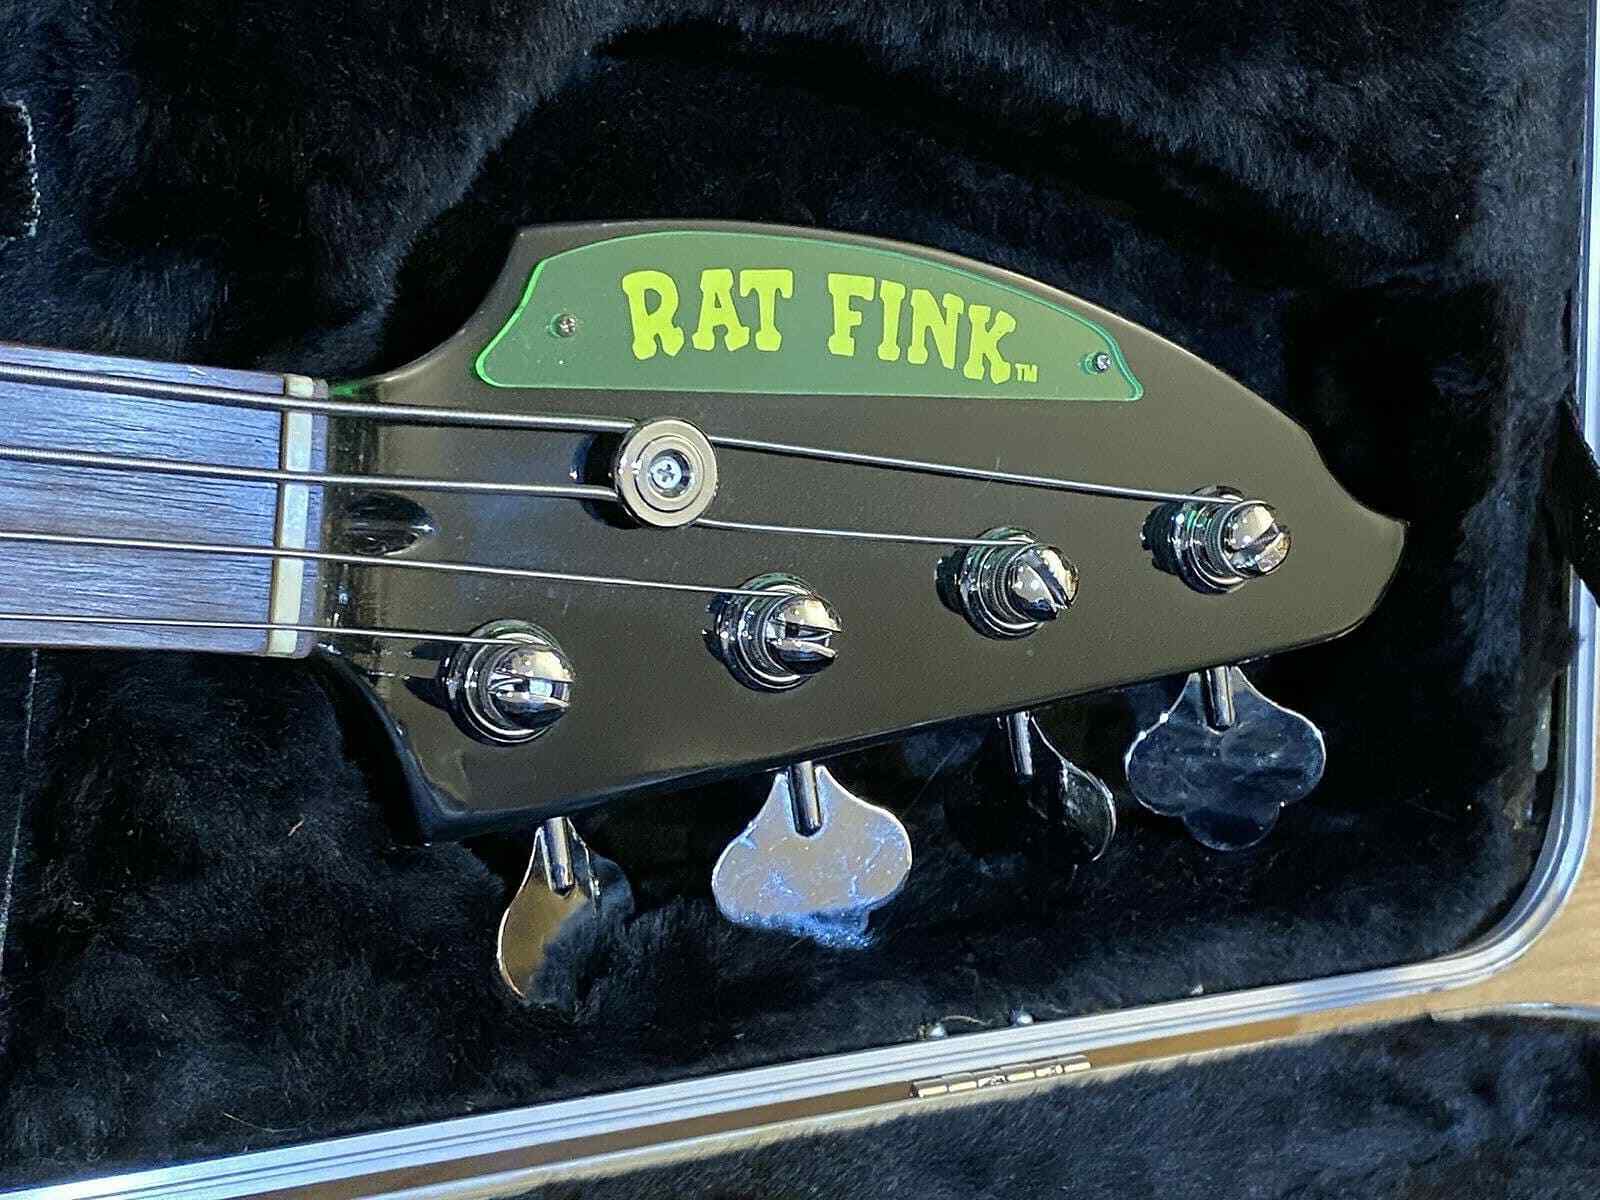 RAT FINKElectric Bass Guitar Ed Roth w Strap and Hard Case 2003 Limited Edition